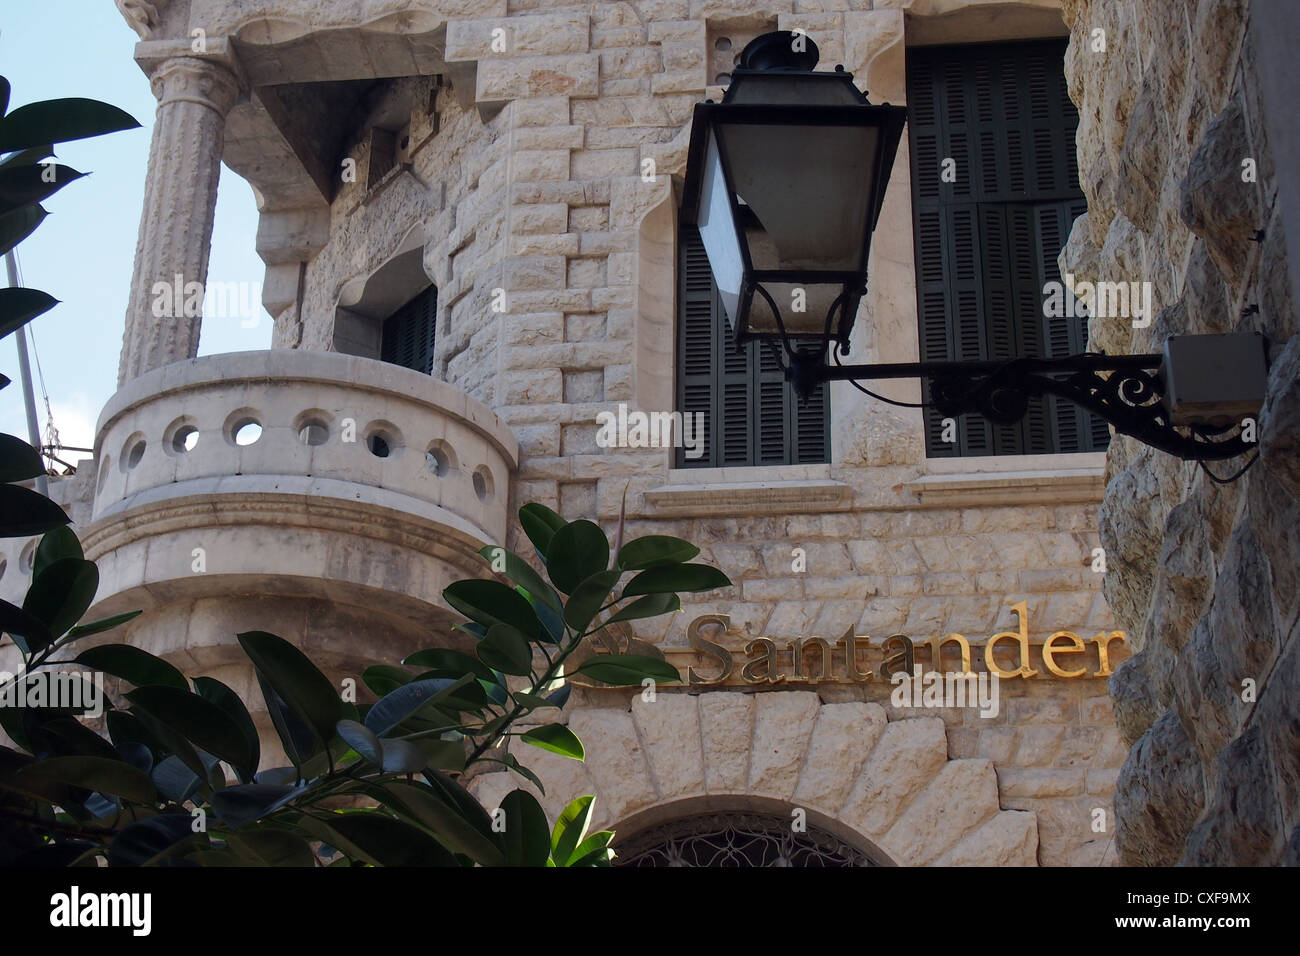 A branch of the Spanish bank Santander in Soller Mallorca Spain Stock Photo